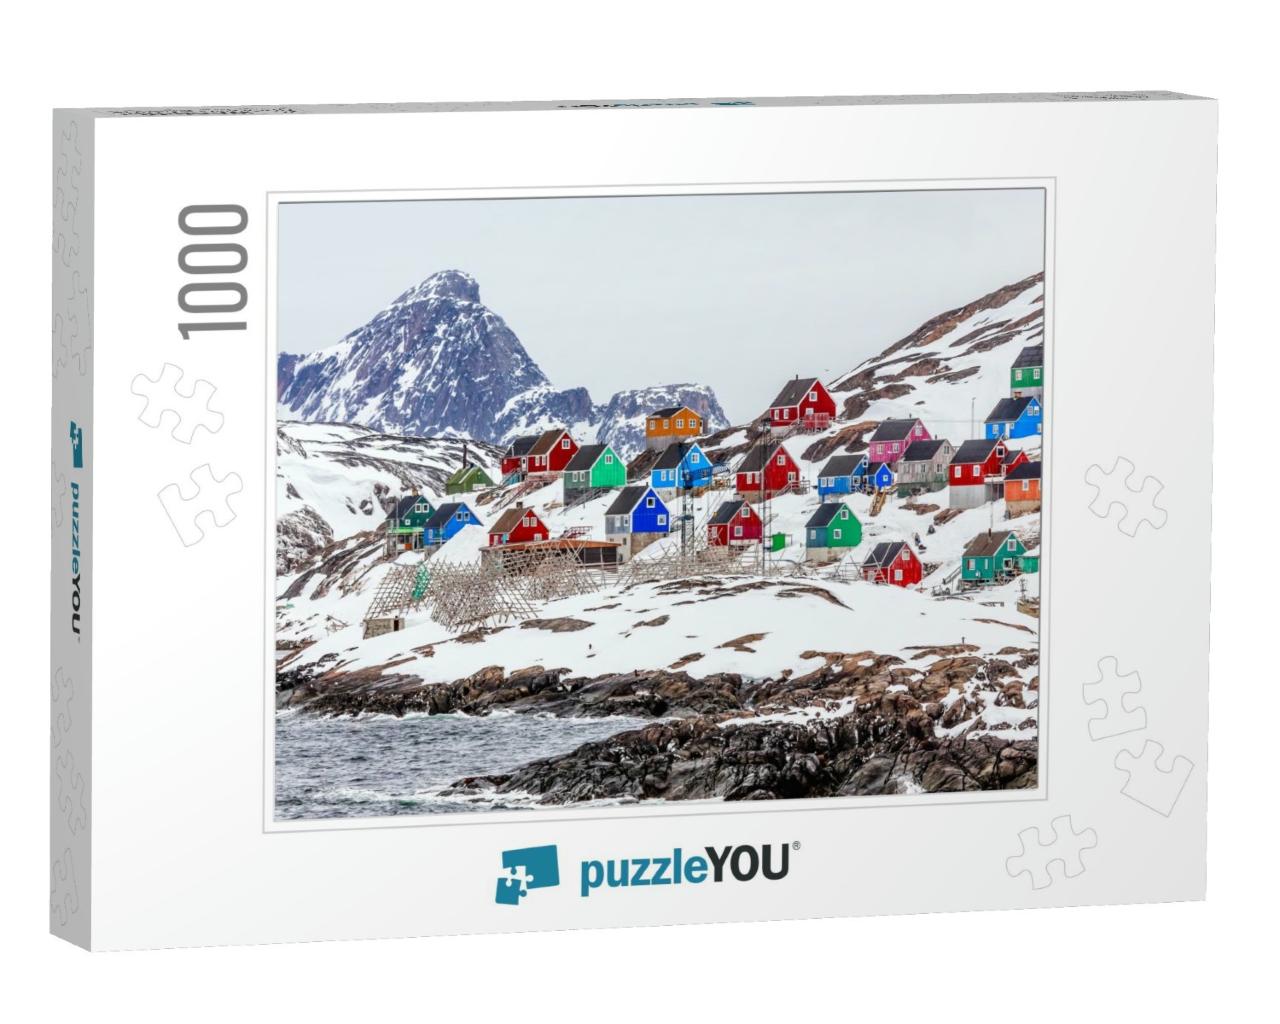 Kangamiut Village in the Middle of Nowhere, Greenland May... Jigsaw Puzzle with 1000 pieces